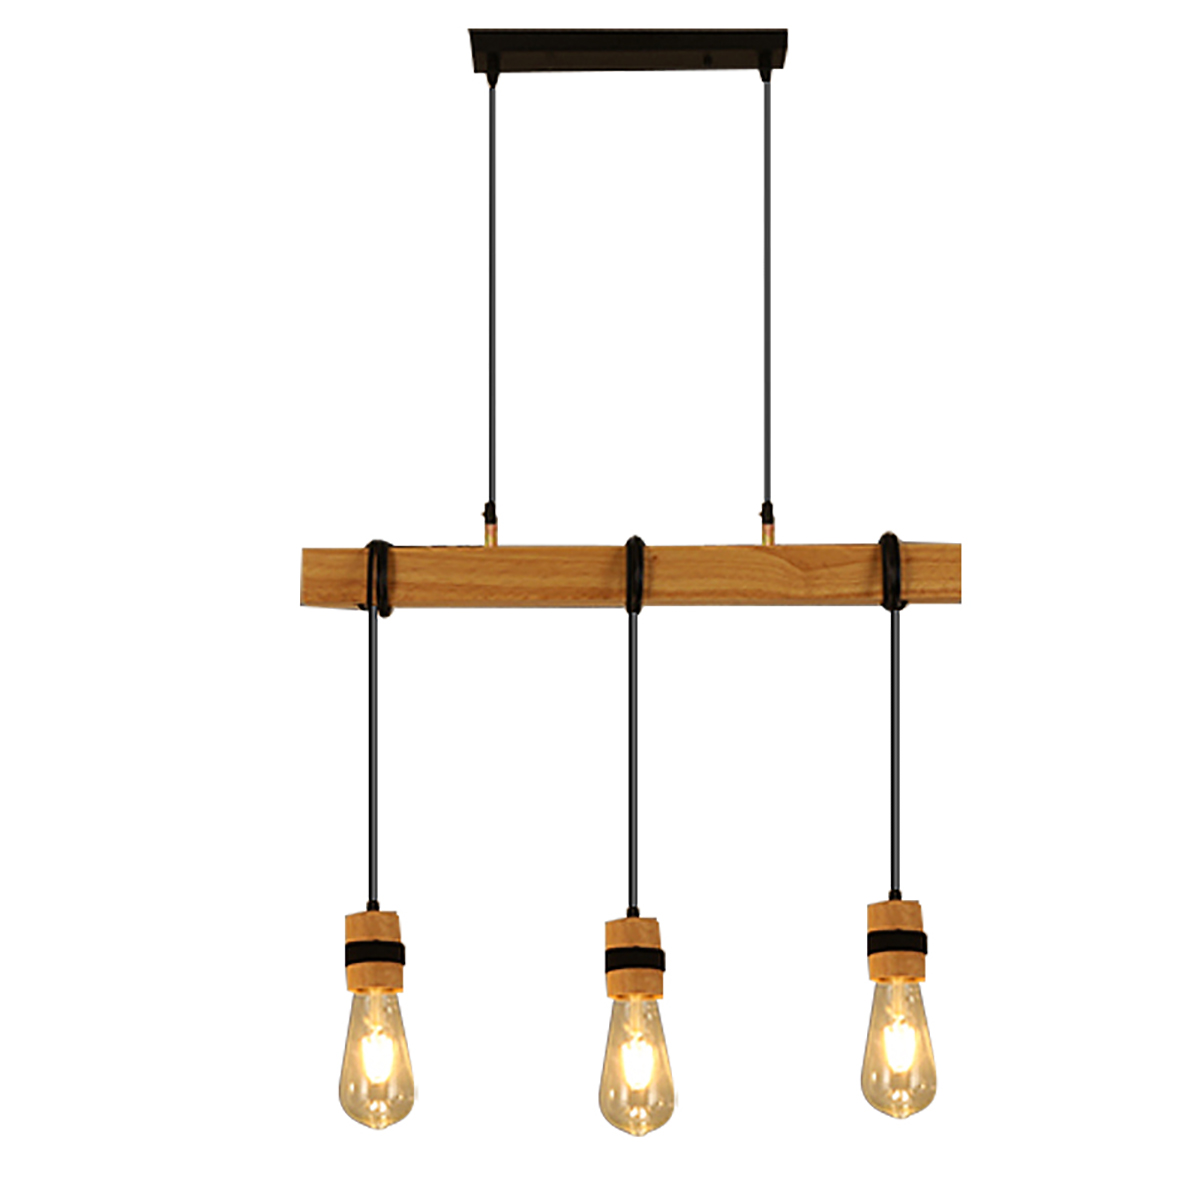 AC85-265V-Industrial-Wooden-E27-Pendant-Light-Ceiling-Lamp-Chandeliers-Lighting-Fixtures-Without-Bul-1815131-3